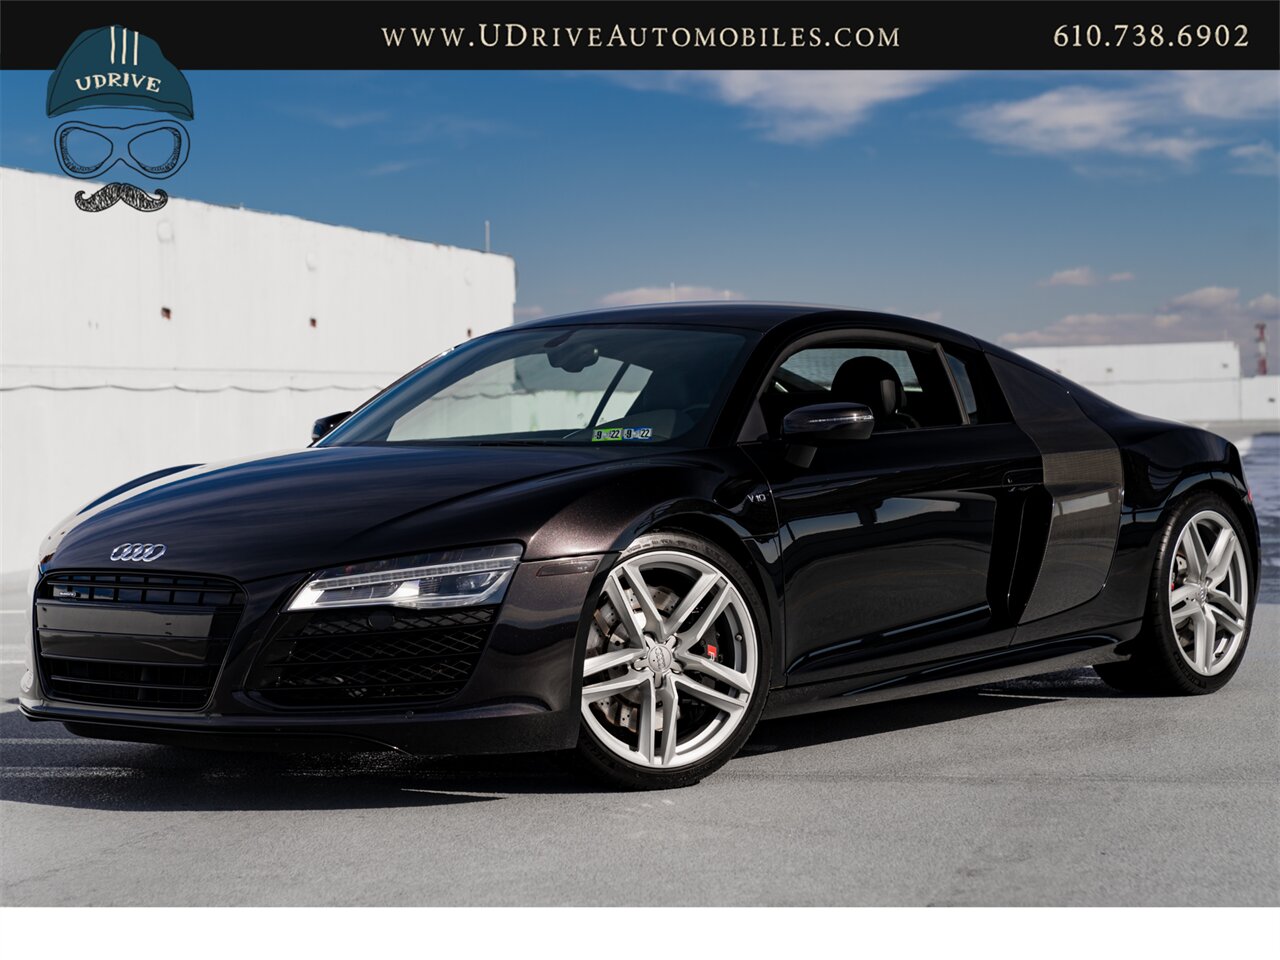 2014 Audi R8 5.2 Quattro  V10 RARE Panther Black 1 of 8 Produced Carbon Sigma Blades Service History - Photo 1 - West Chester, PA 19382